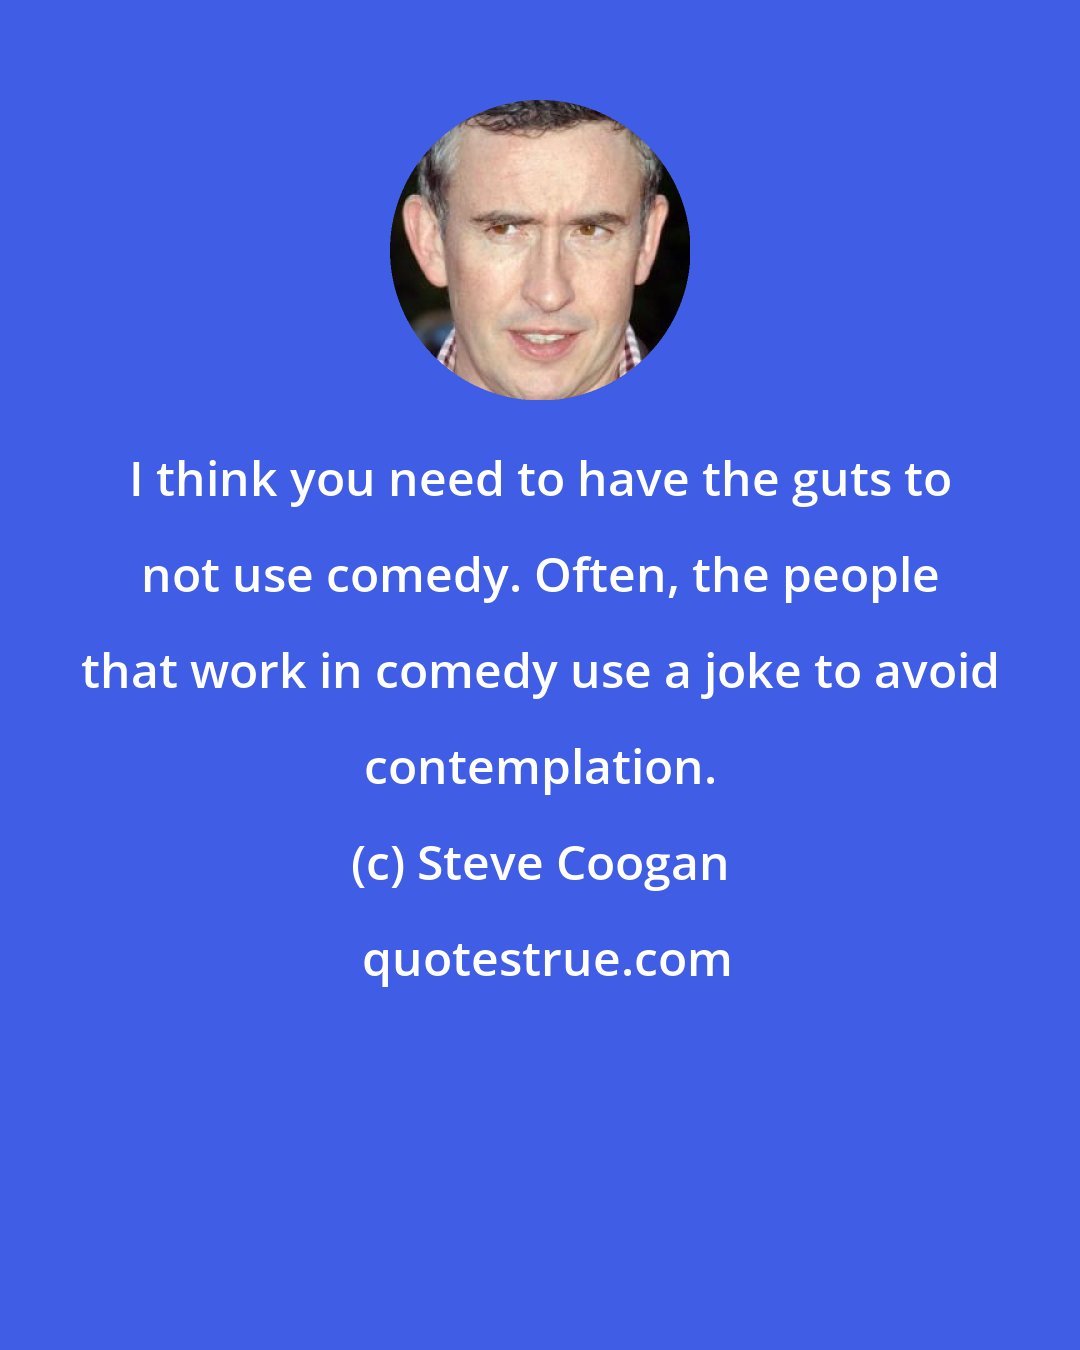 Steve Coogan: I think you need to have the guts to not use comedy. Often, the people that work in comedy use a joke to avoid contemplation.